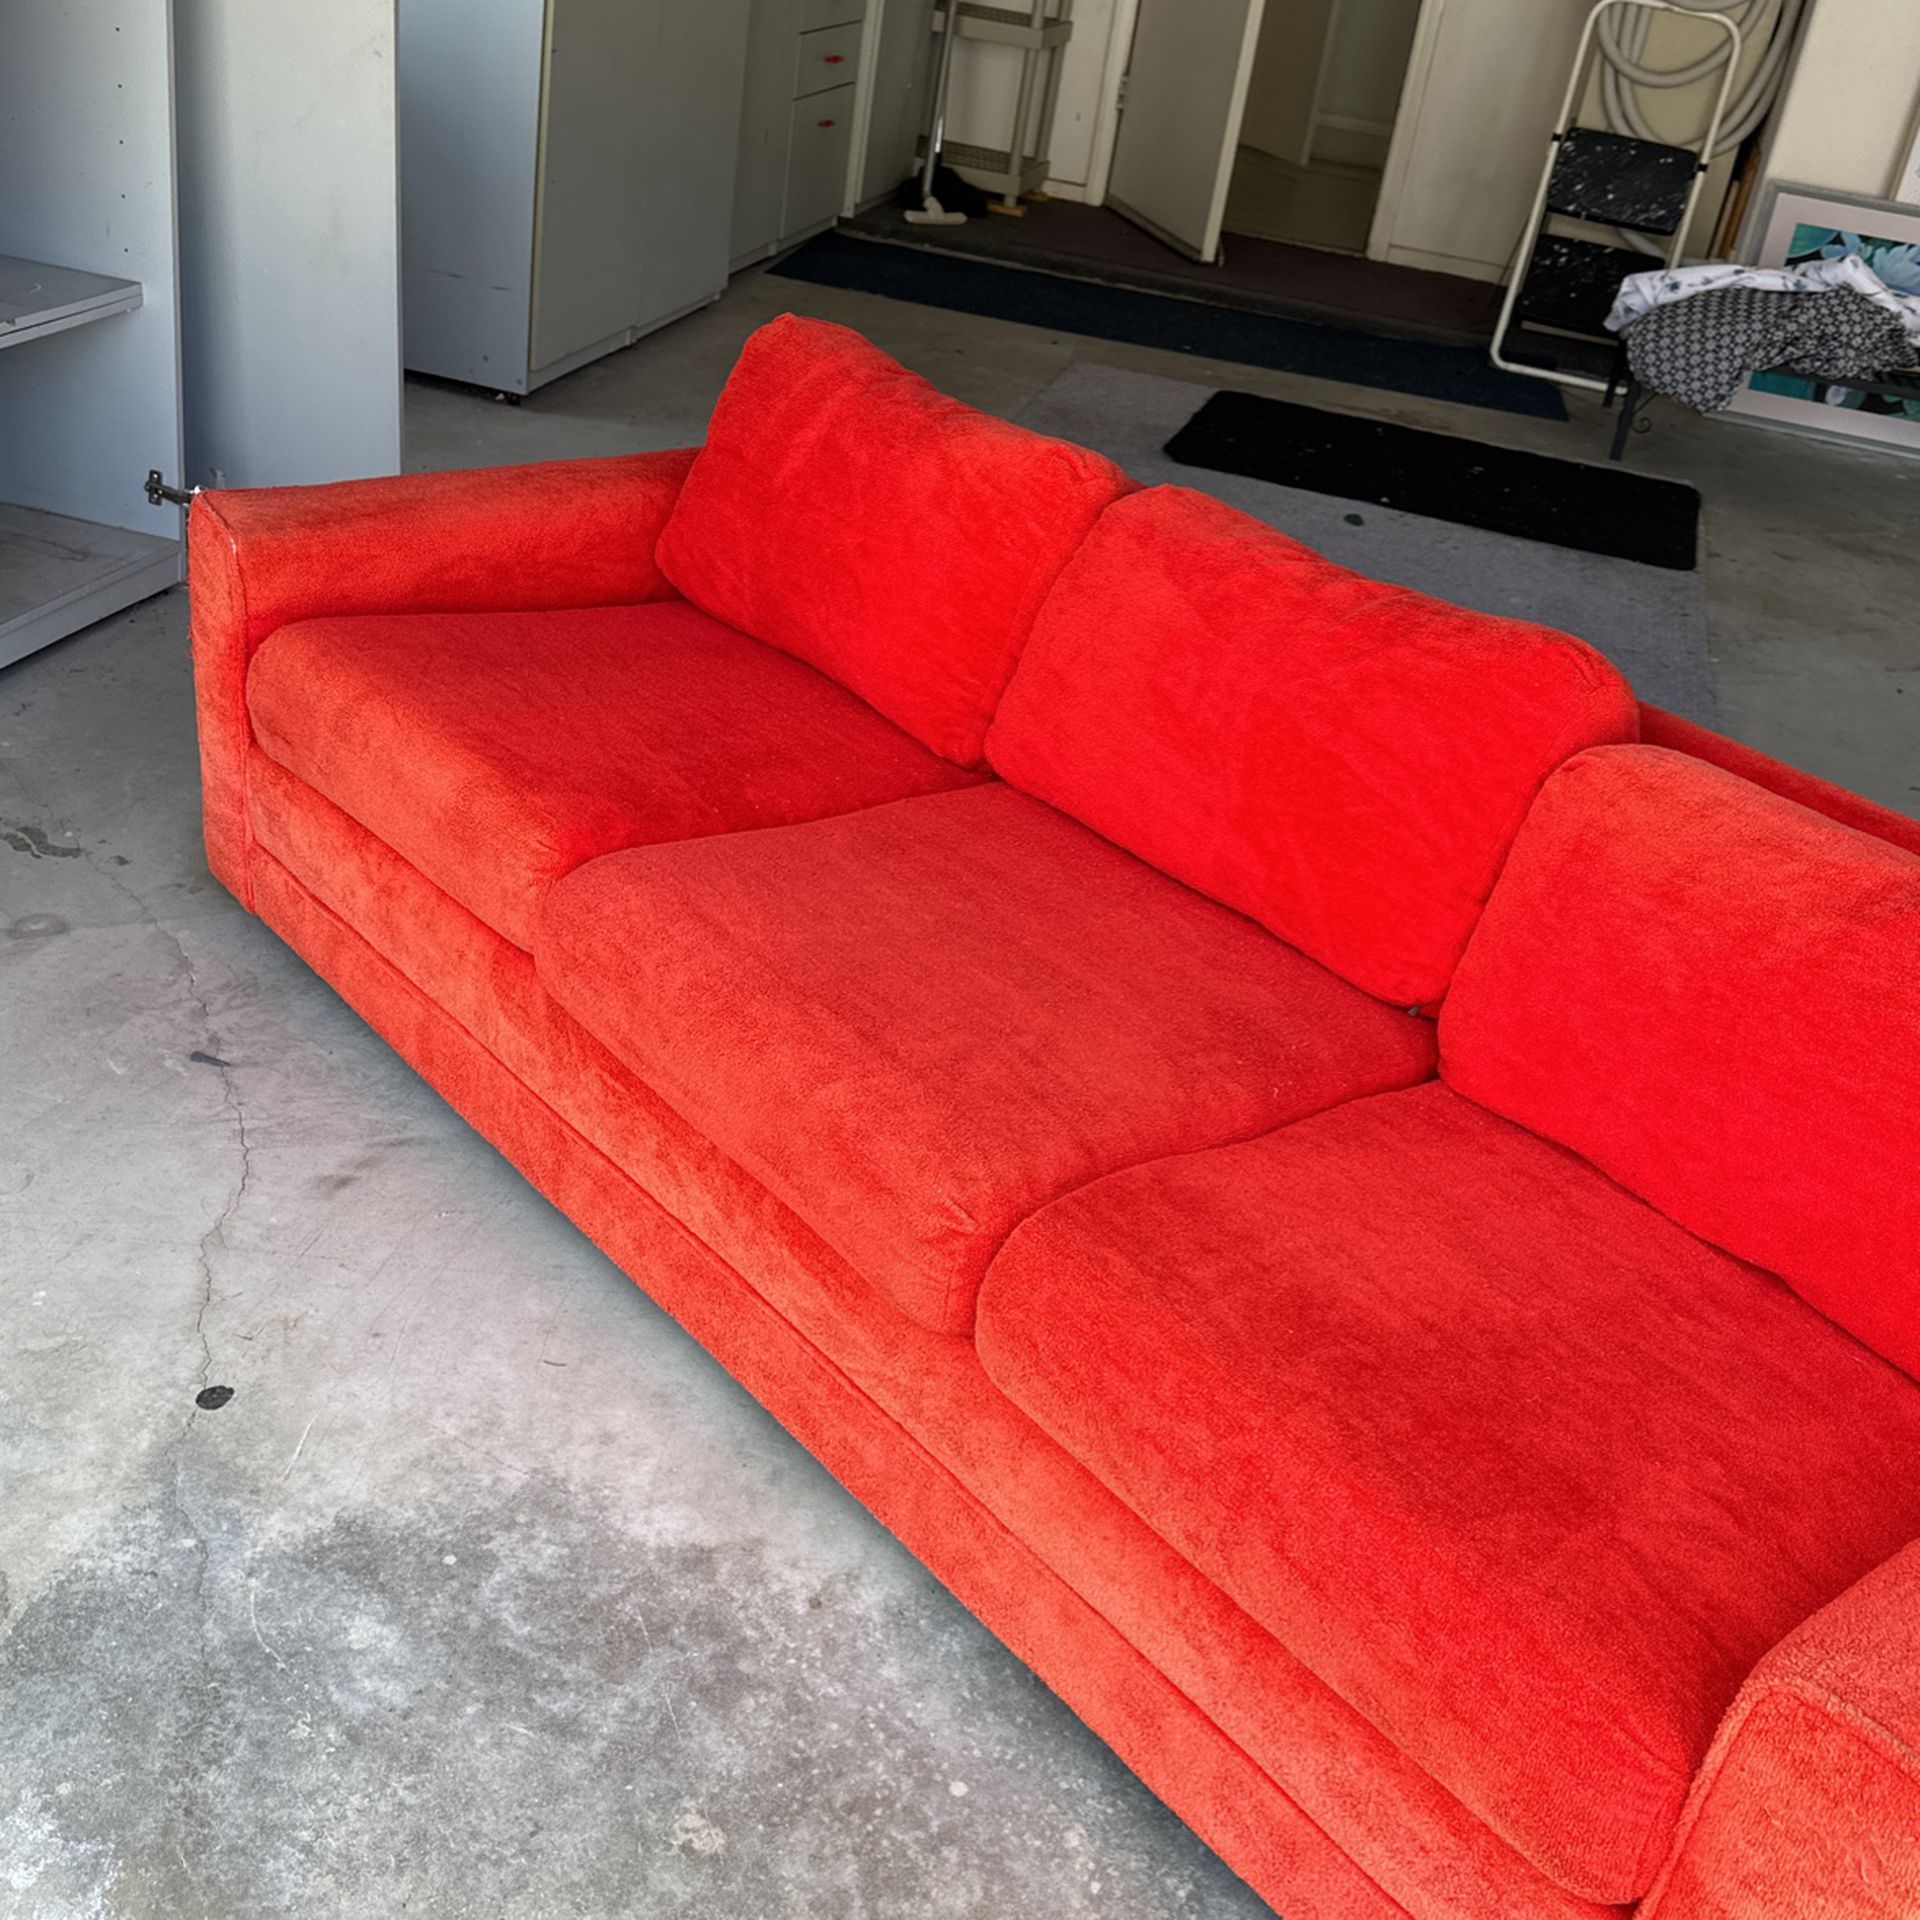 Free - Red Couch